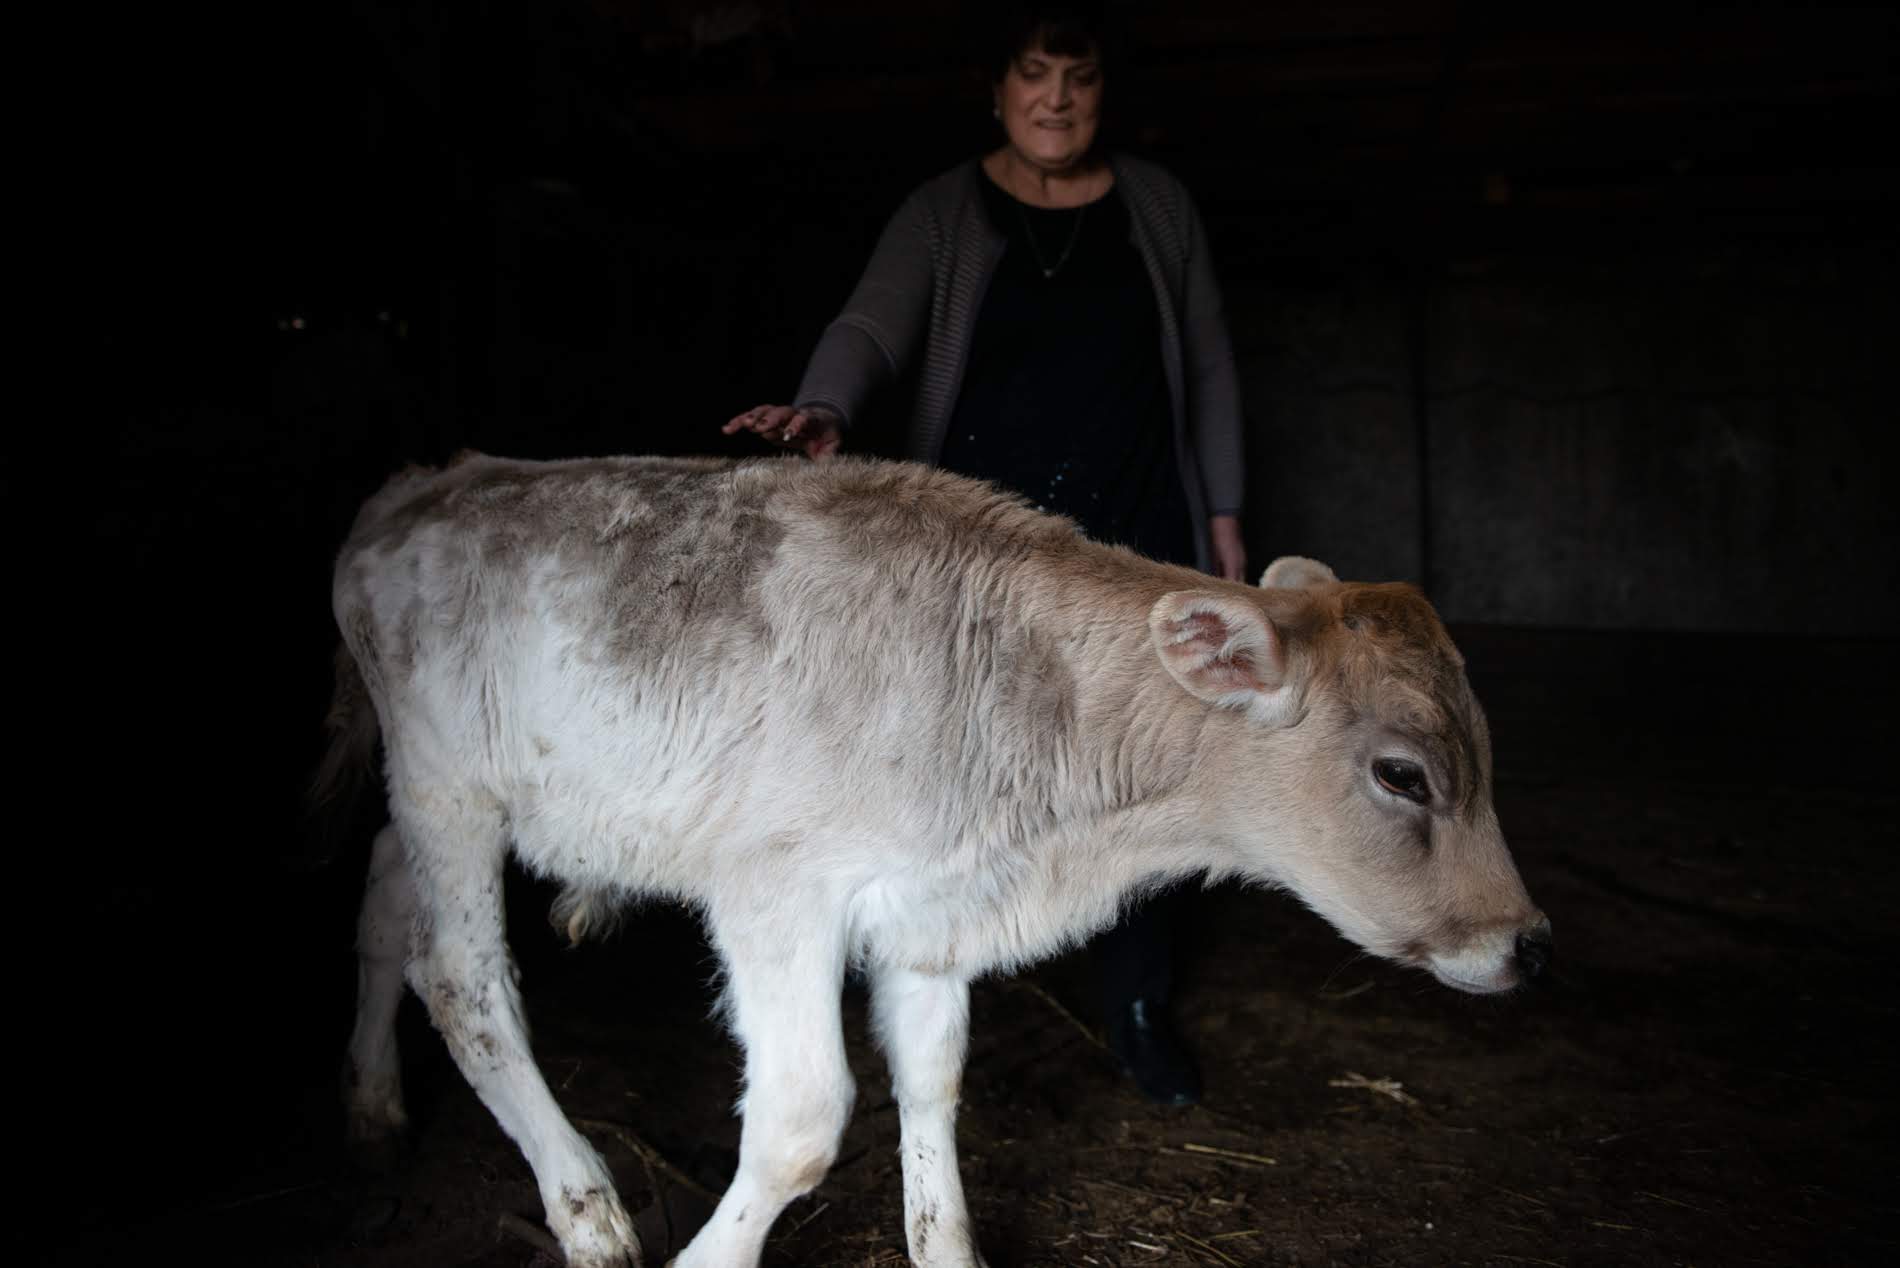 Nunu Katsiashvili's family purchased nearly 100 cattle in 2011. But as grazing land dried up in the growing summer heat, their venture began to fail. Now they only have 13 cattle left.

Photo: Tamuna Chkareuli/OC Media.